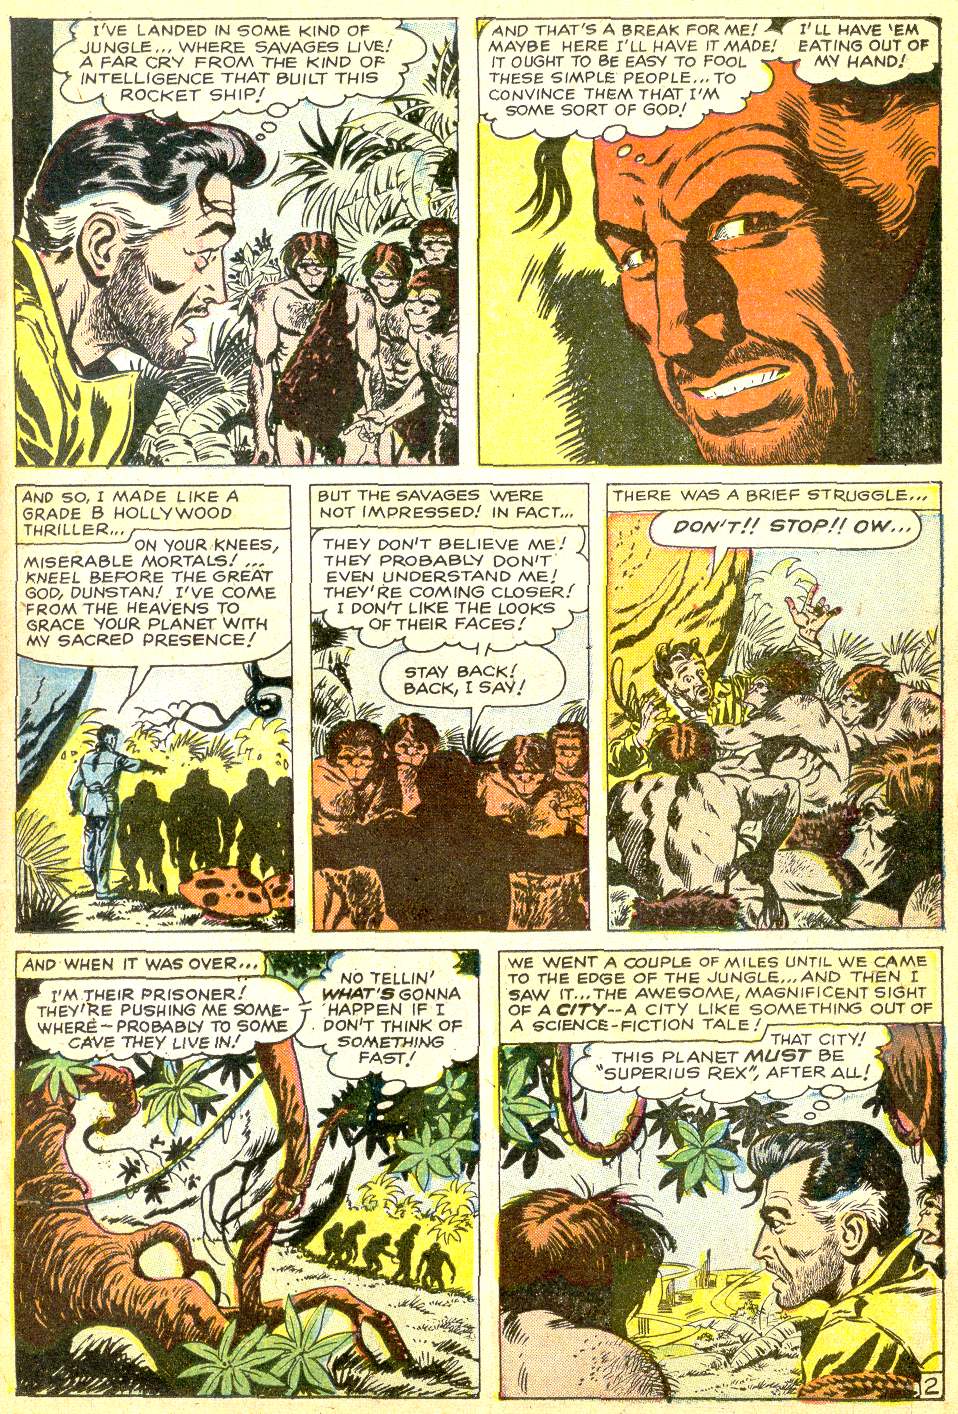 Journey Into Mystery (1952) 55 Page 10